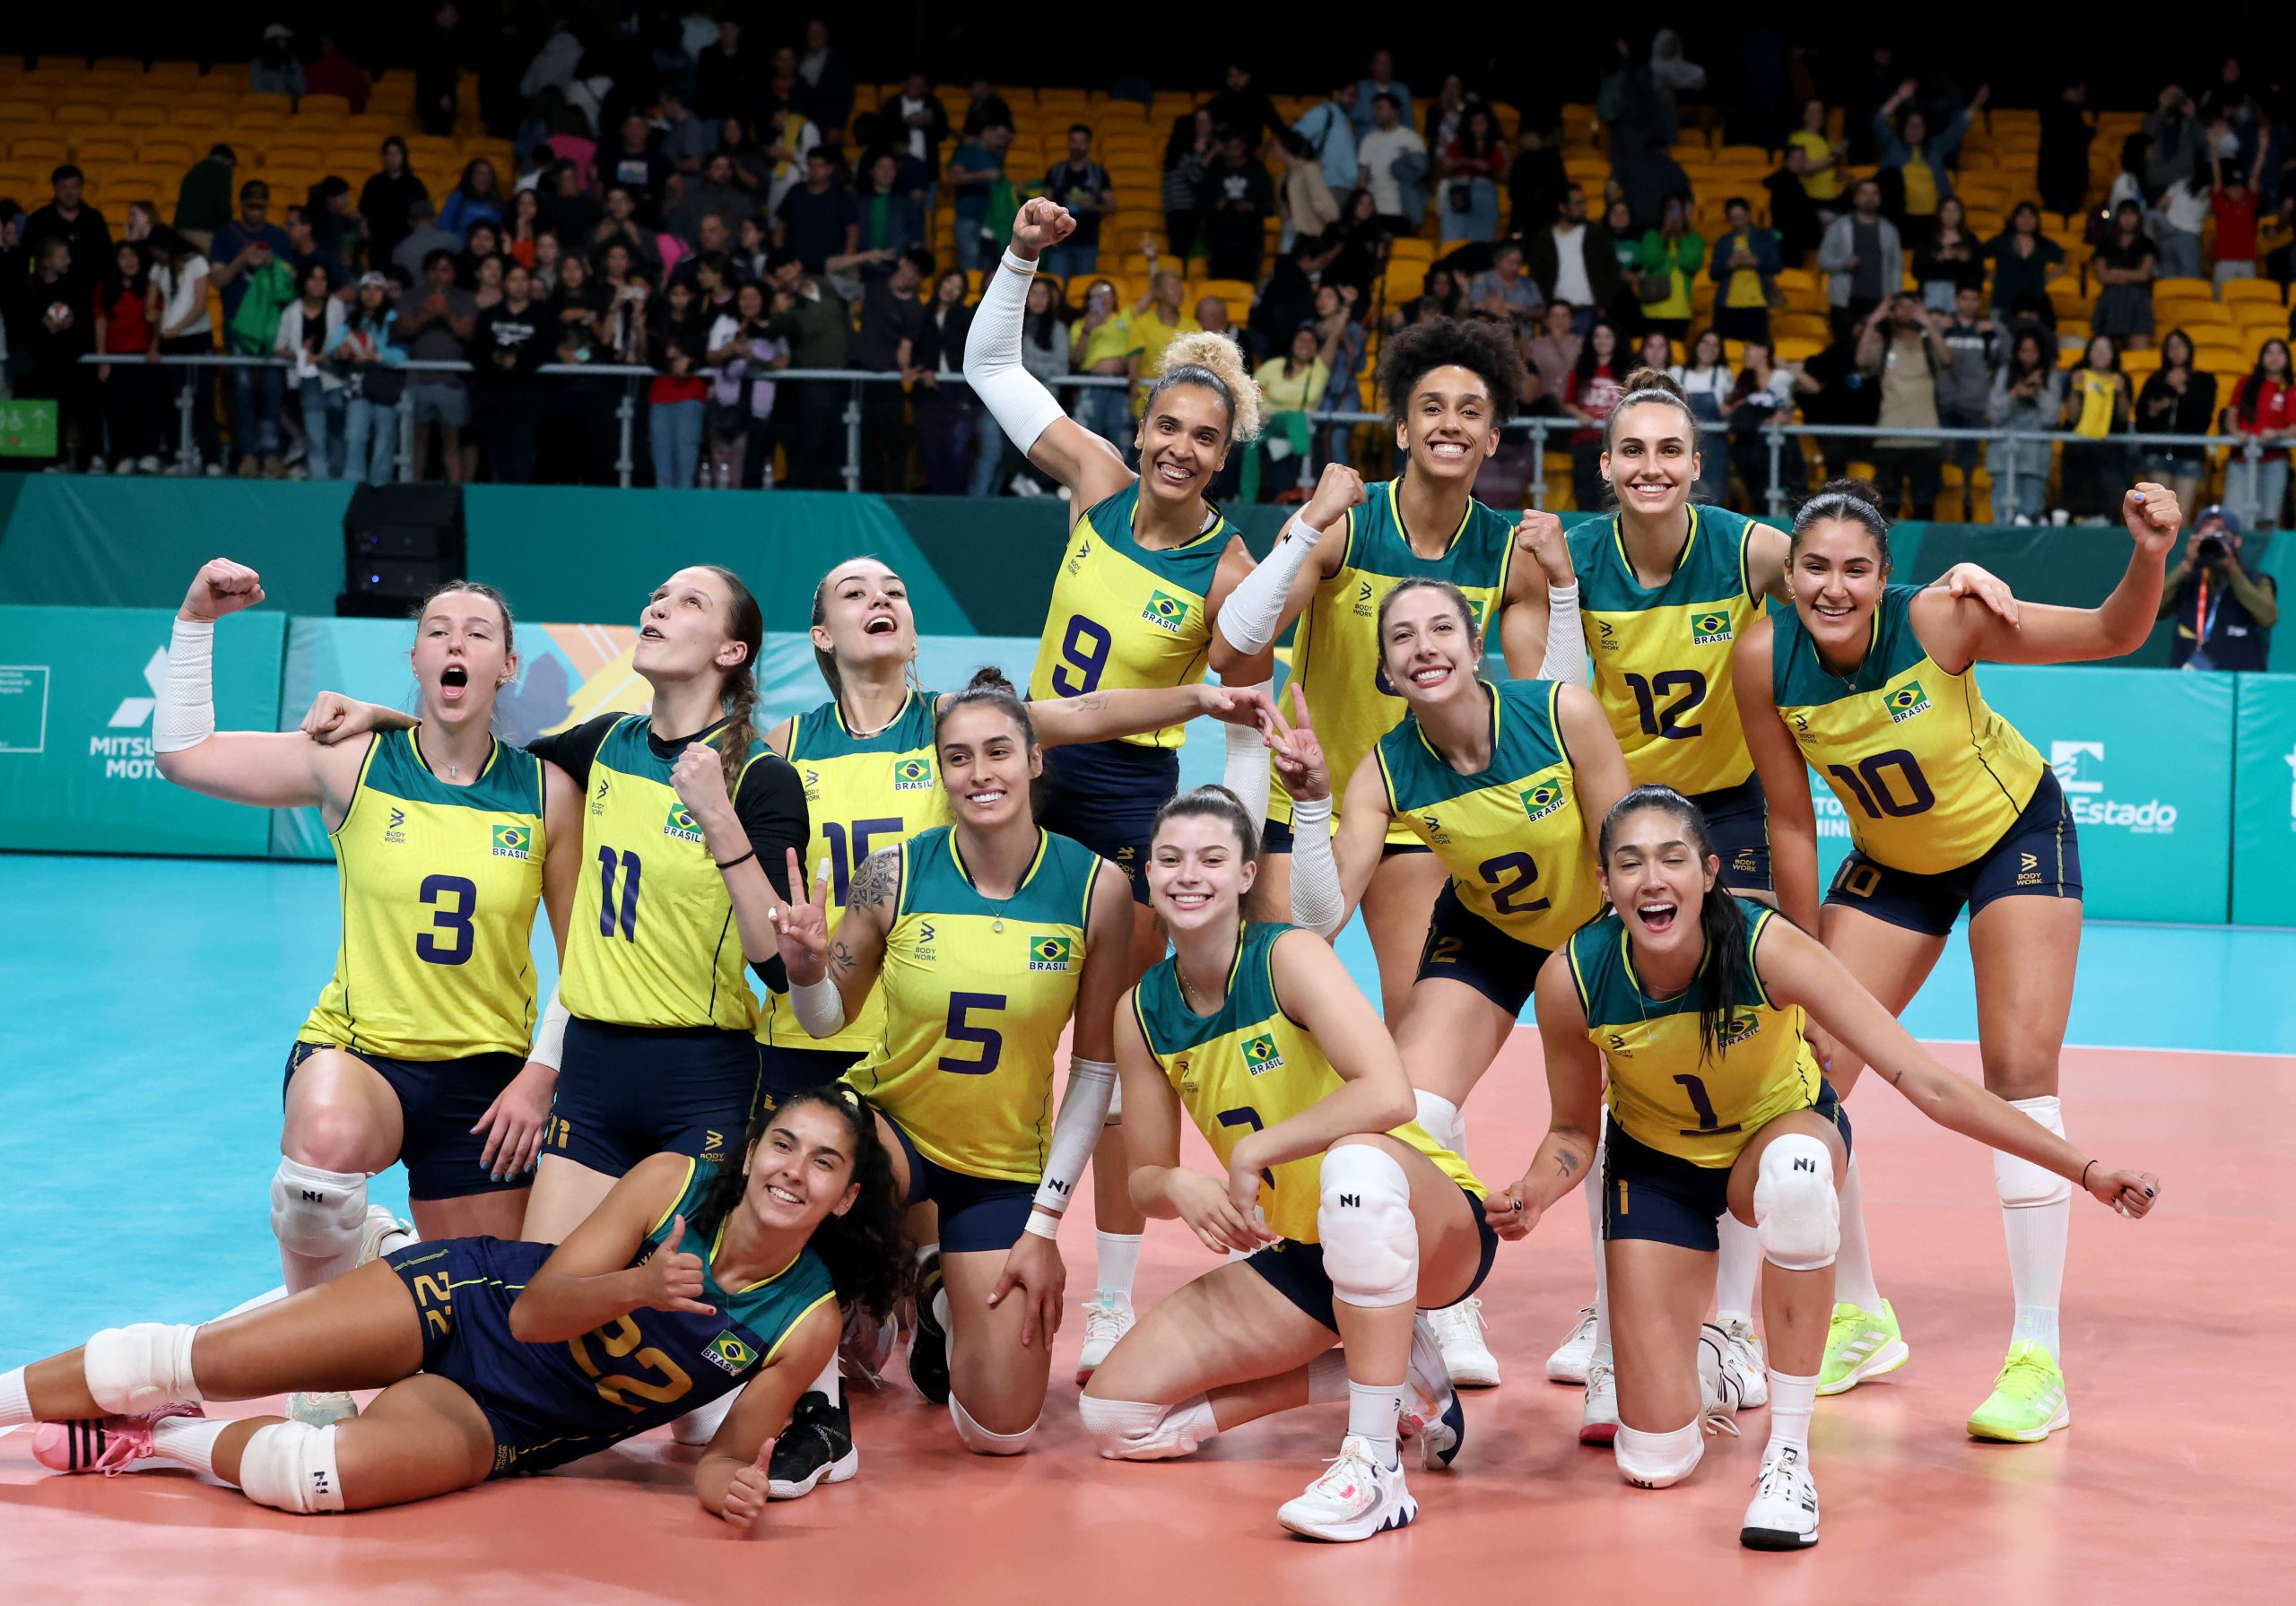 Tie-Break Win over Mexico puts Brazil in the Pan American Games Title Match